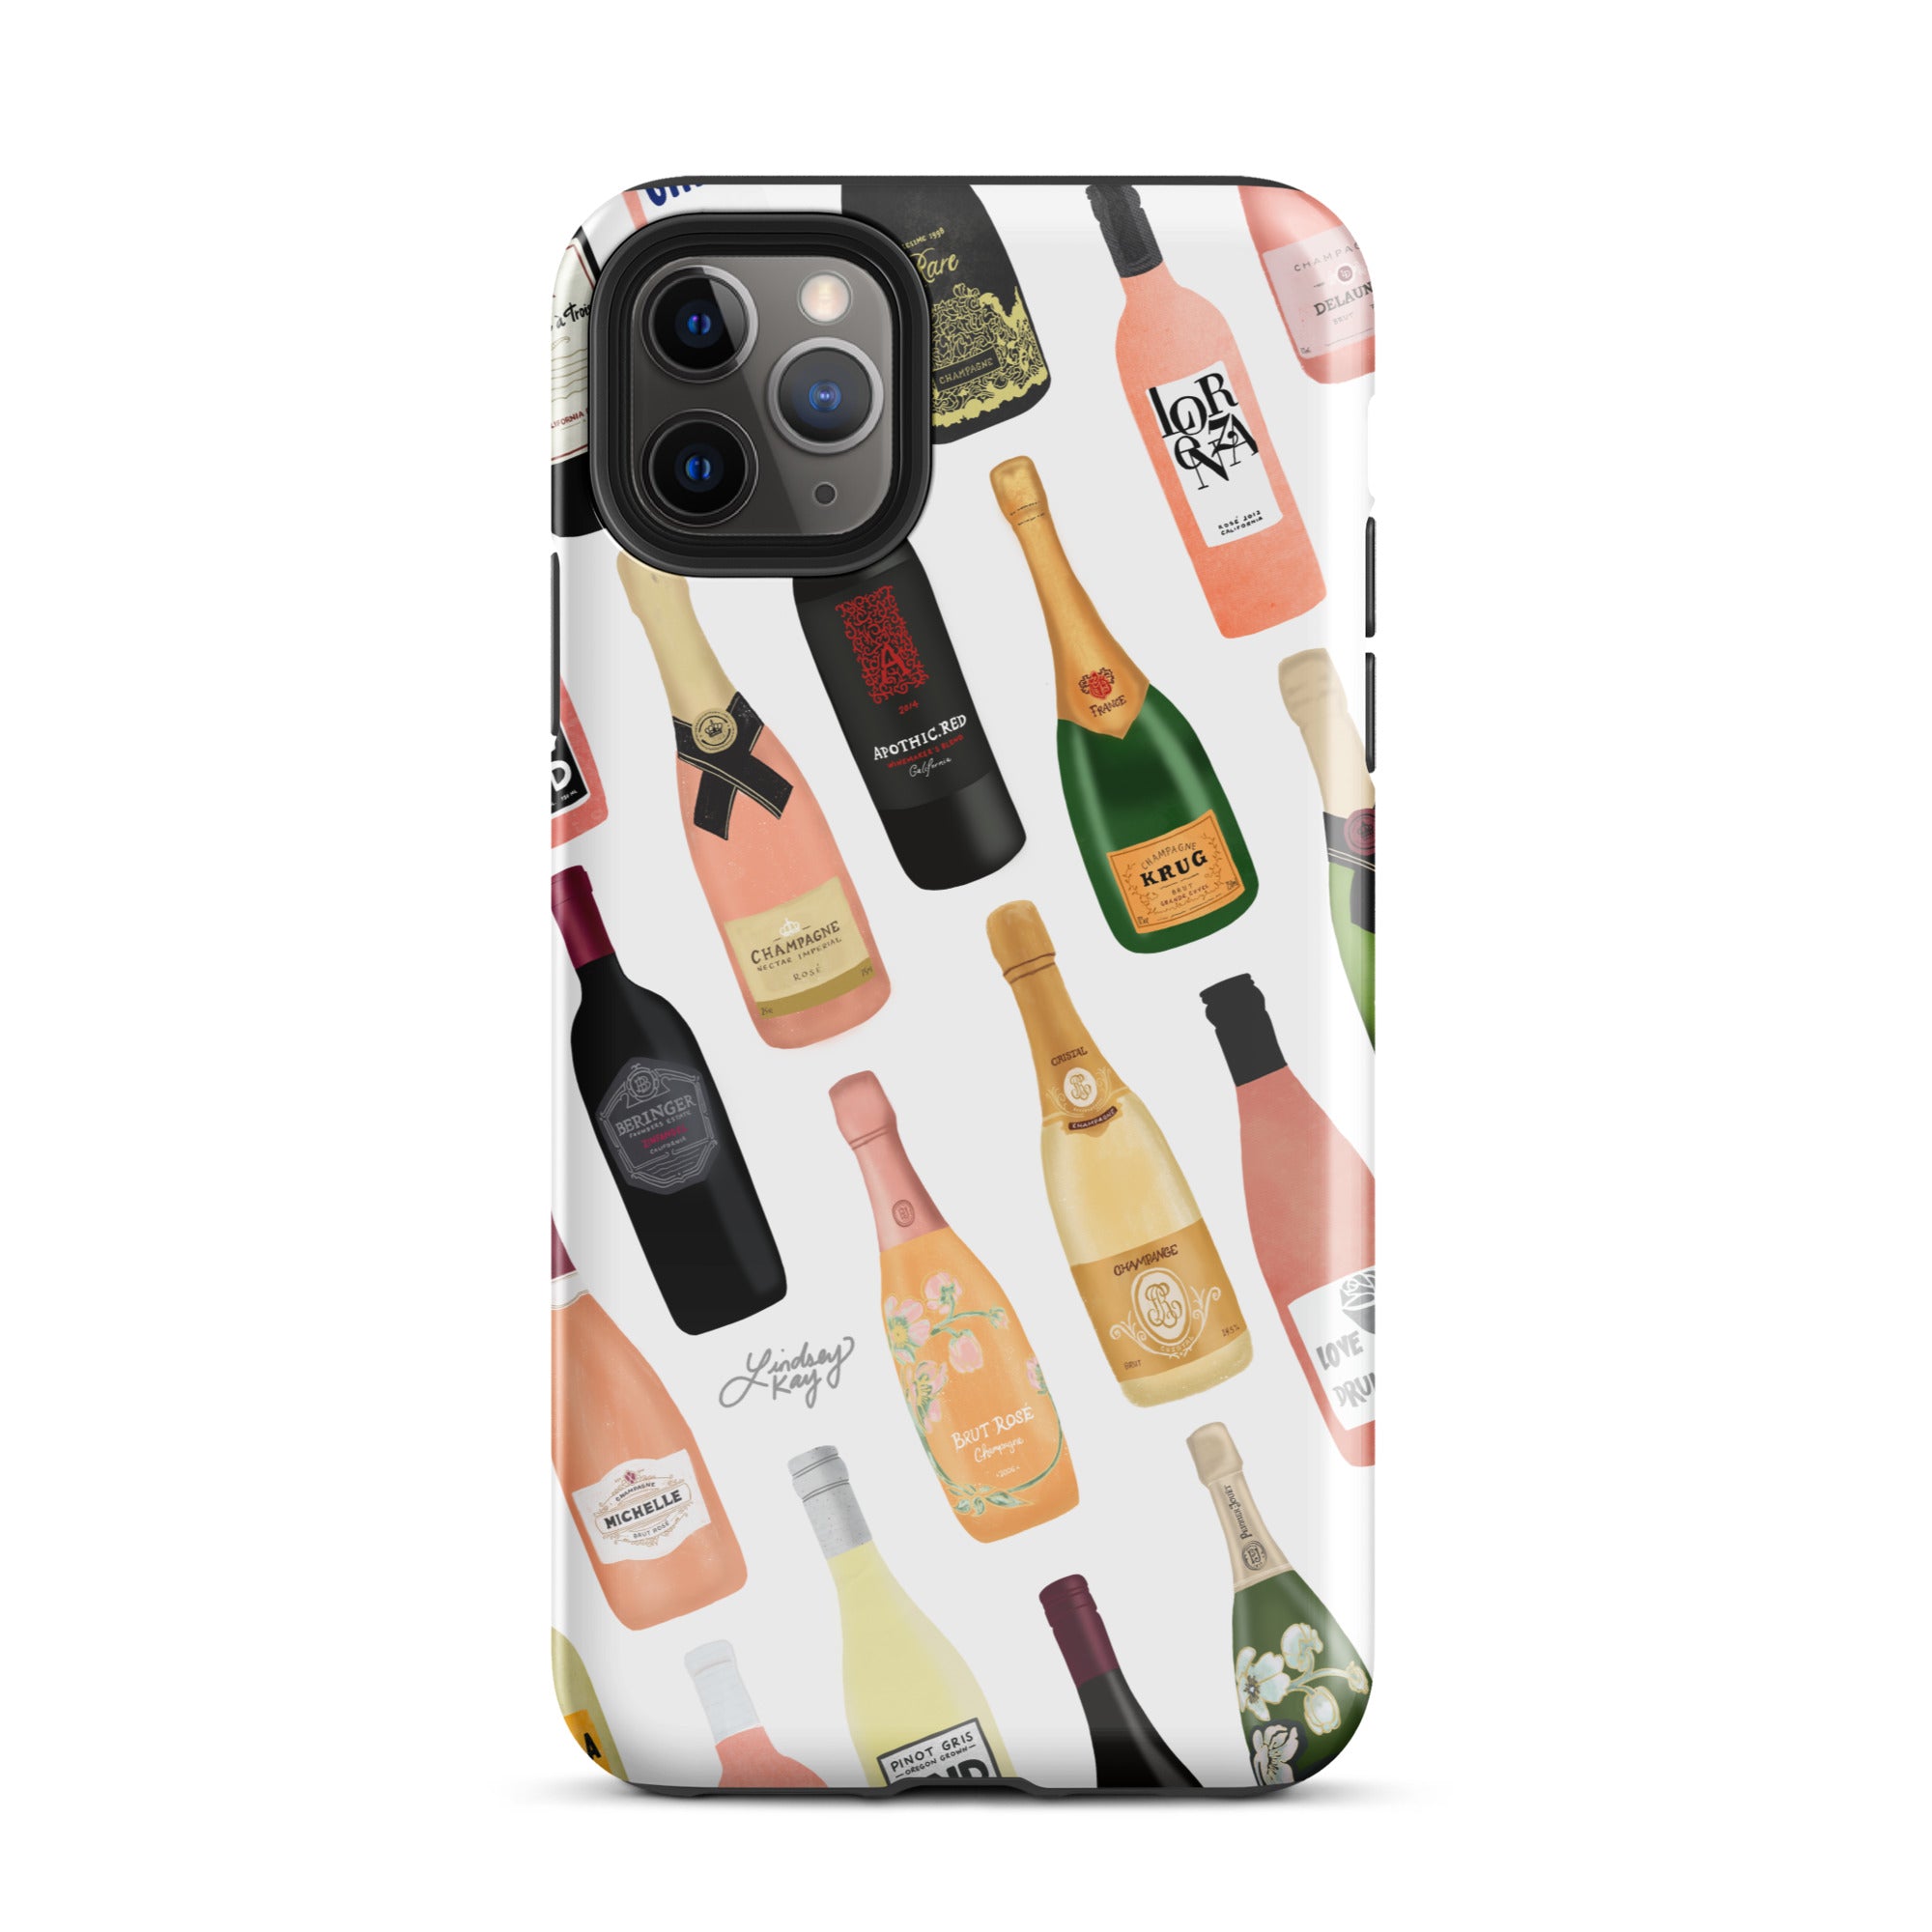 champagne bottles illustration pattern green alcohol pop fizzle click wine bottles iphone tough case cover protector iphone 15 bachelorette gift party favor